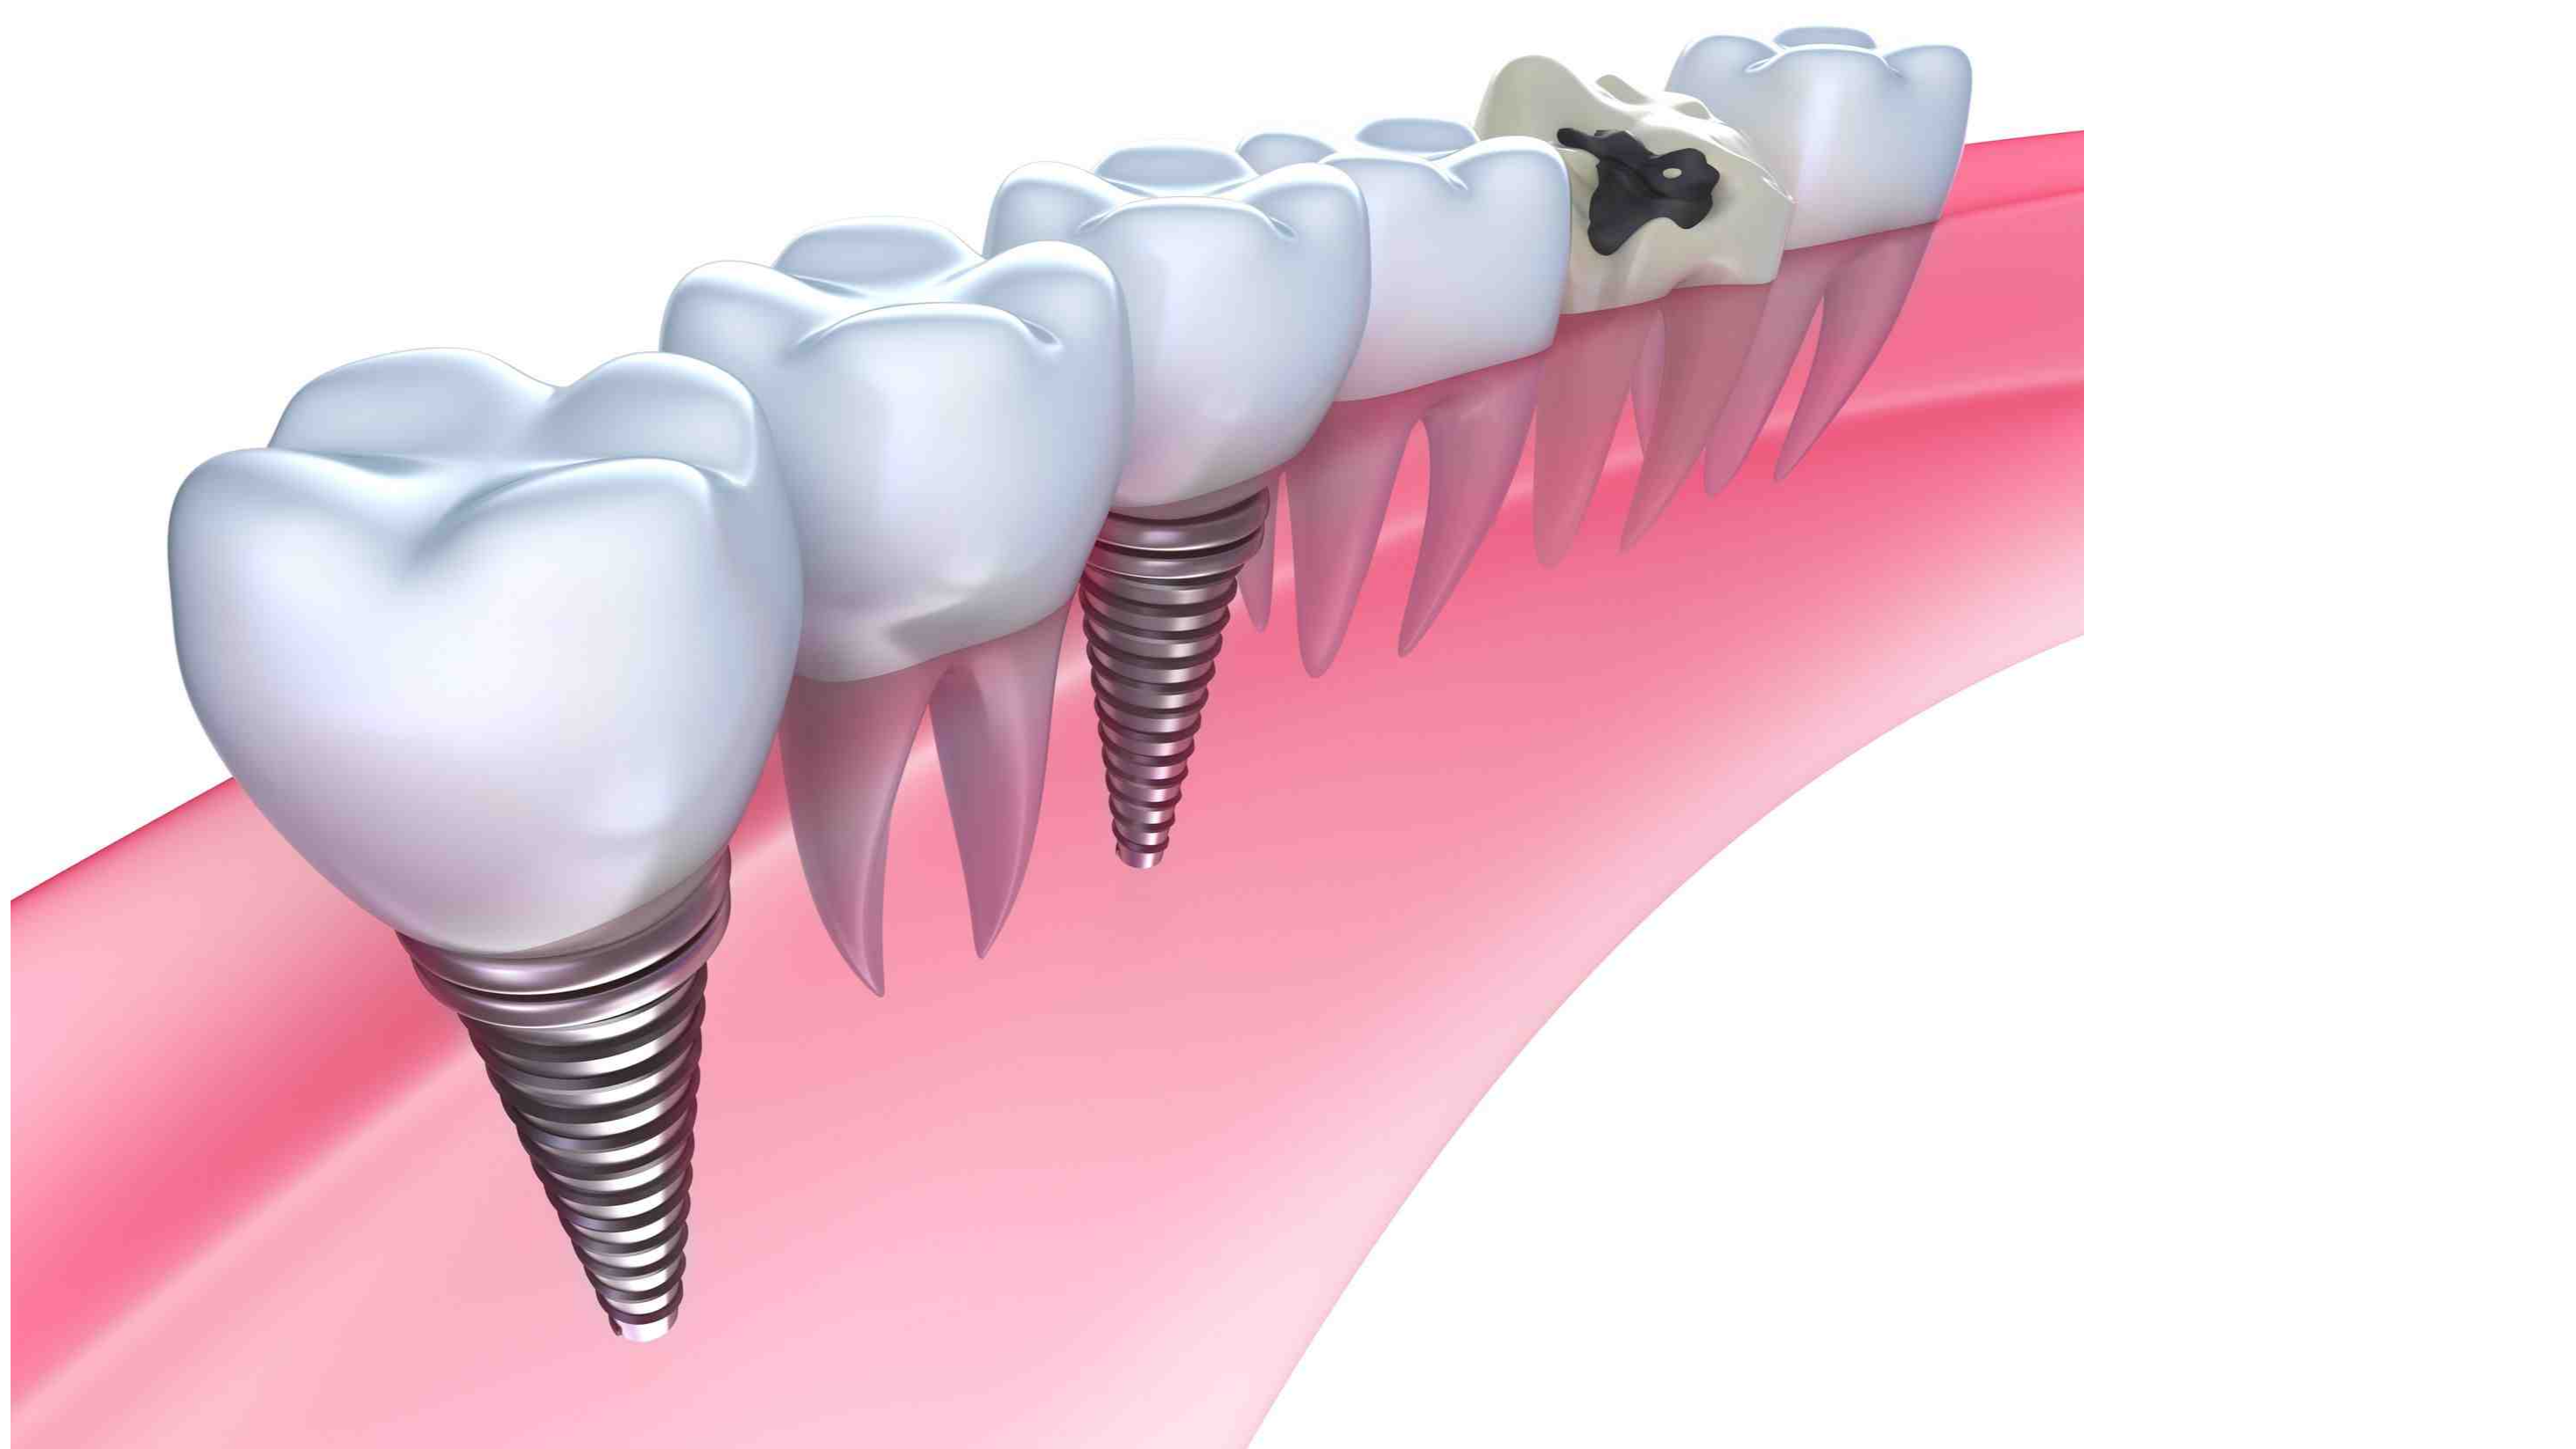 Call Top Jersey City Dental Team For Reliable Implant Installations & Advice